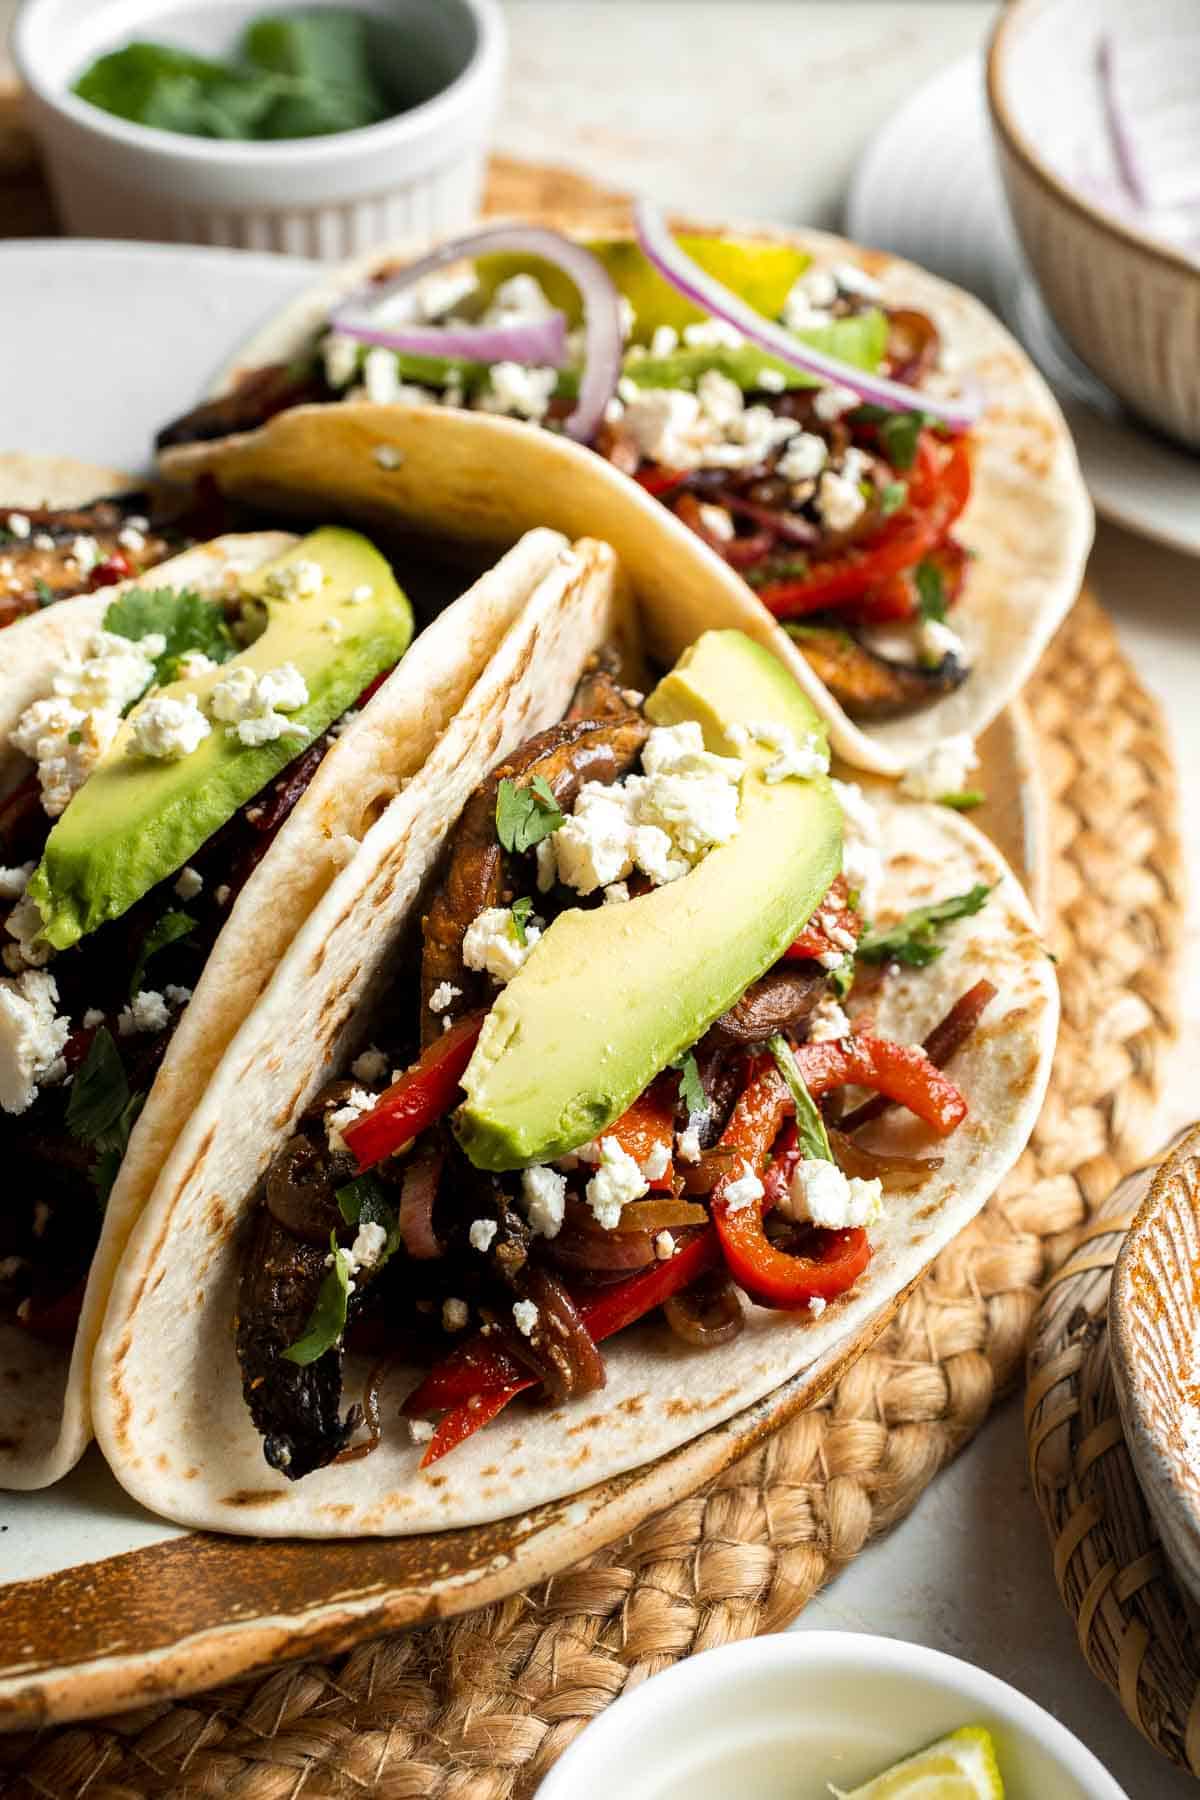 Mushroom Fajitas have all the sizzle and flair of traditional fajitas without the meat! Made with portobello mushrooms, peppers, and onions in 30 minutes! | aheadofthyme.com